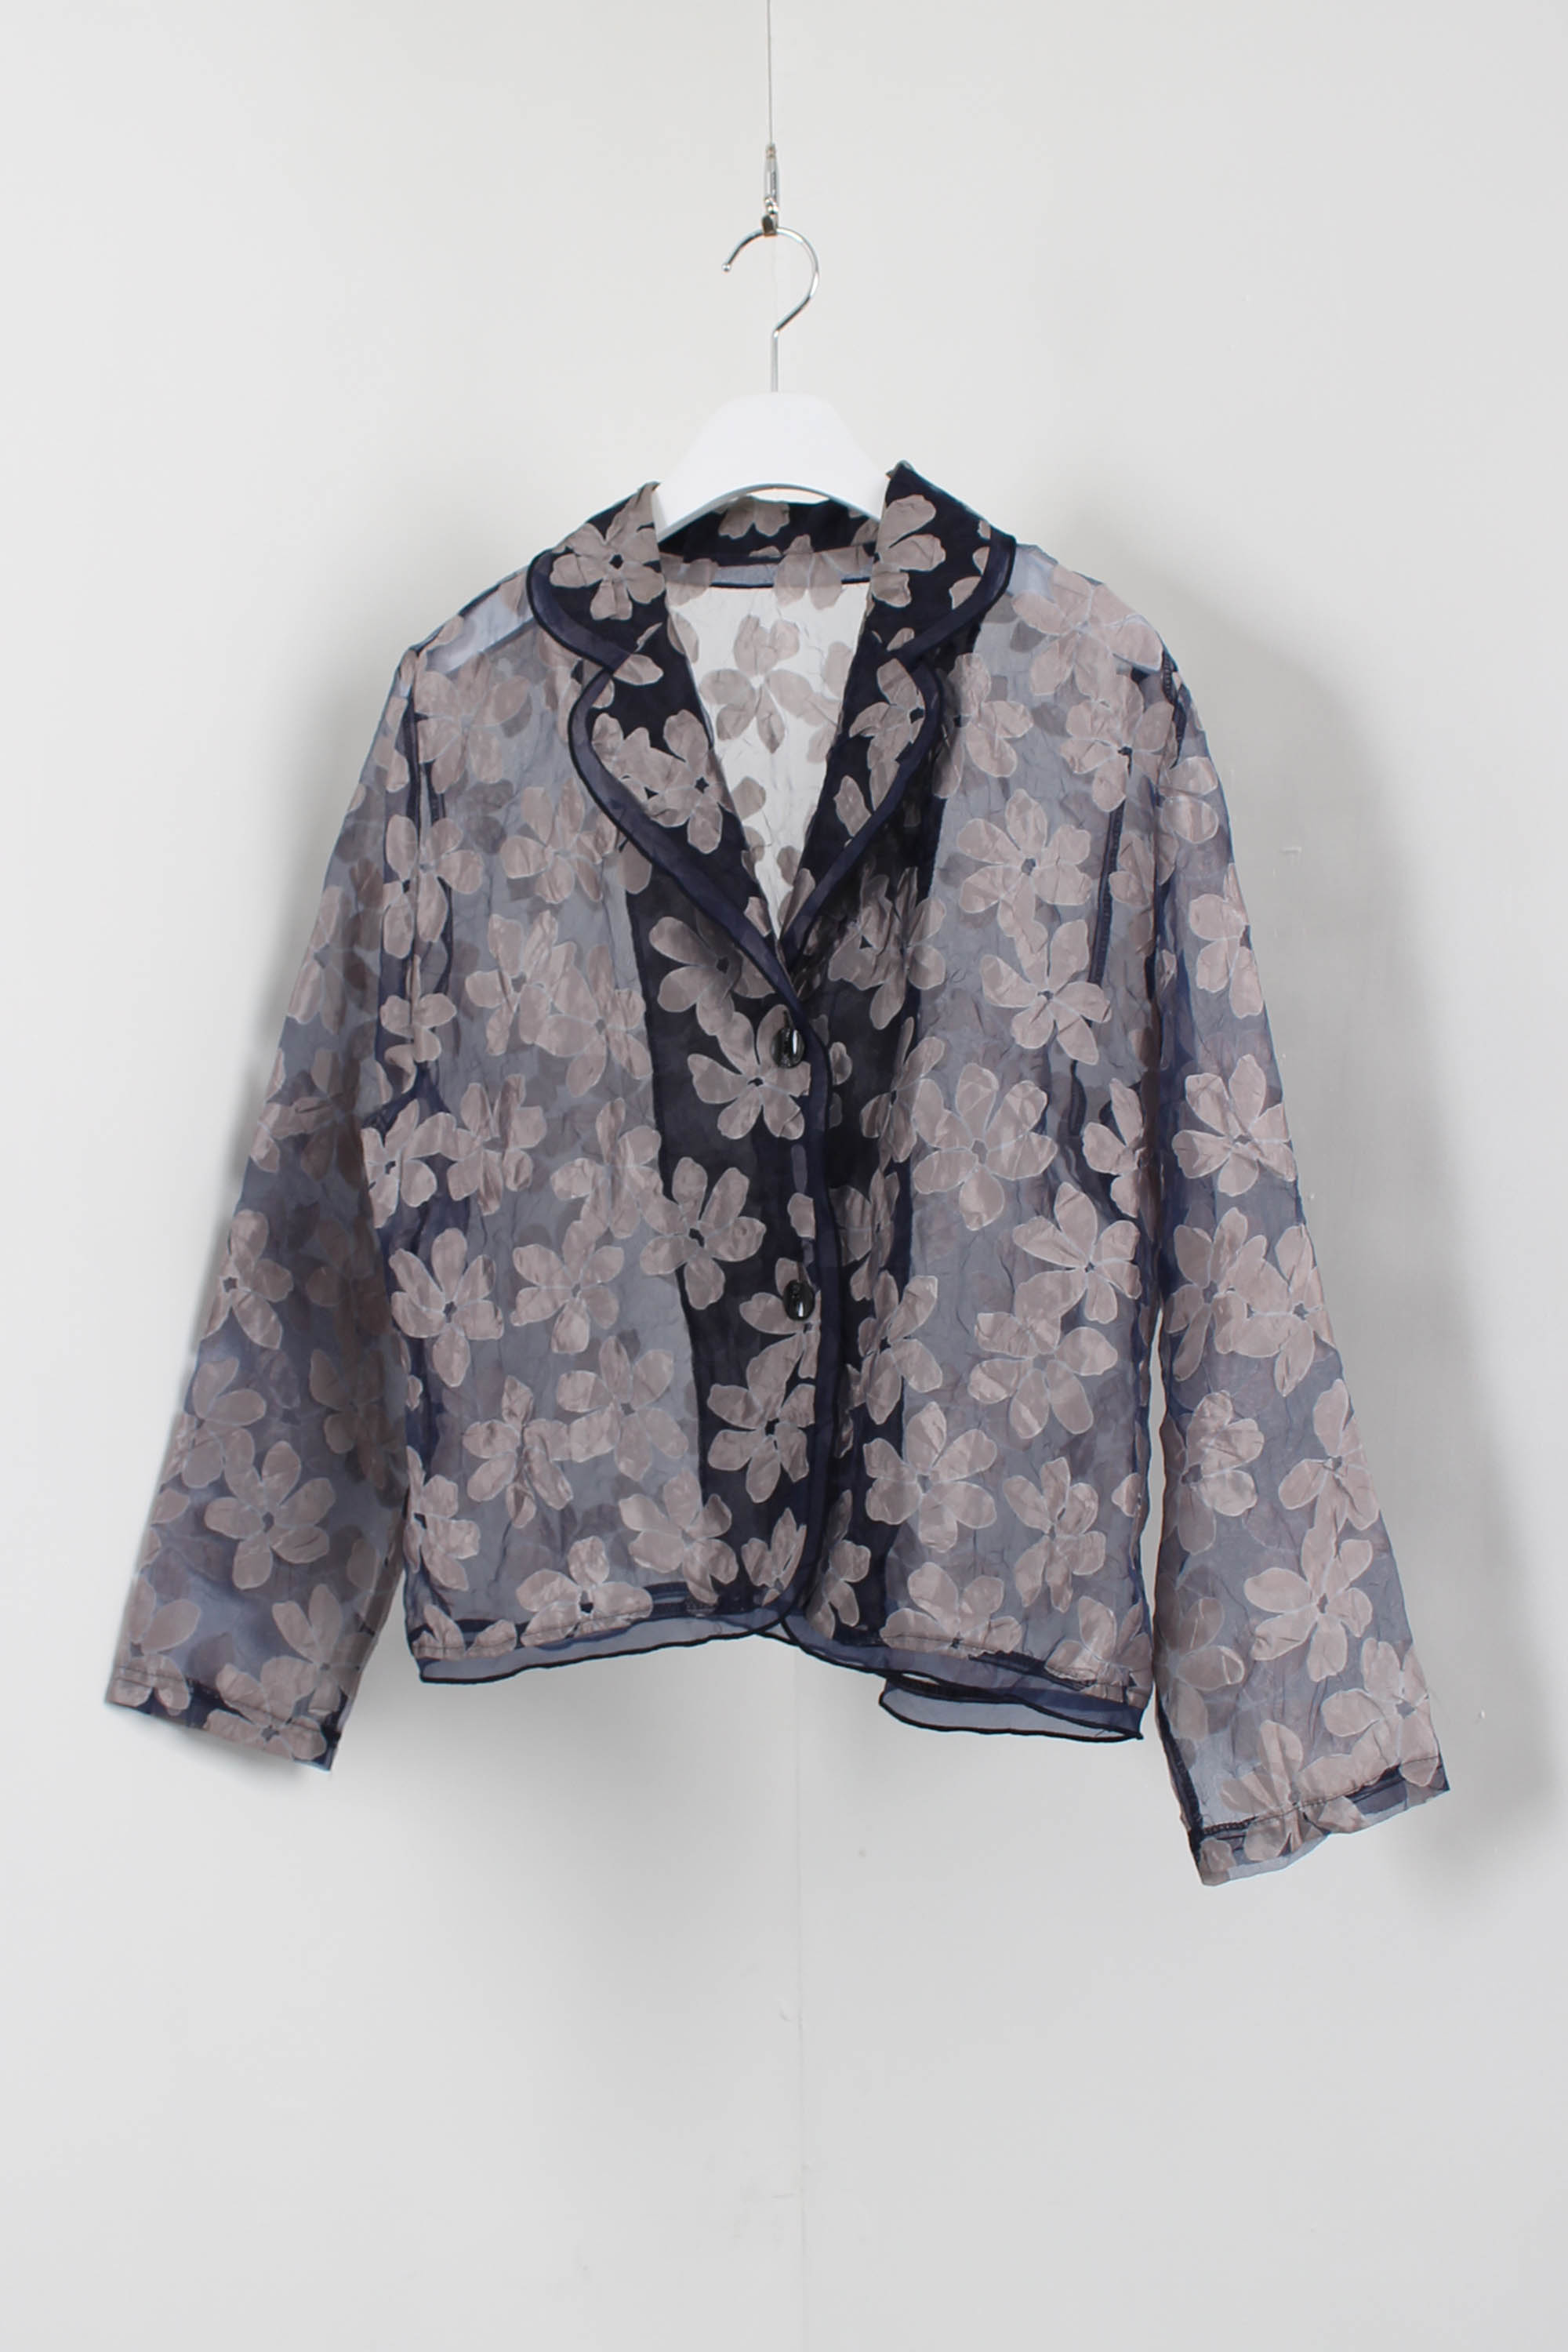 Floral see through jacket